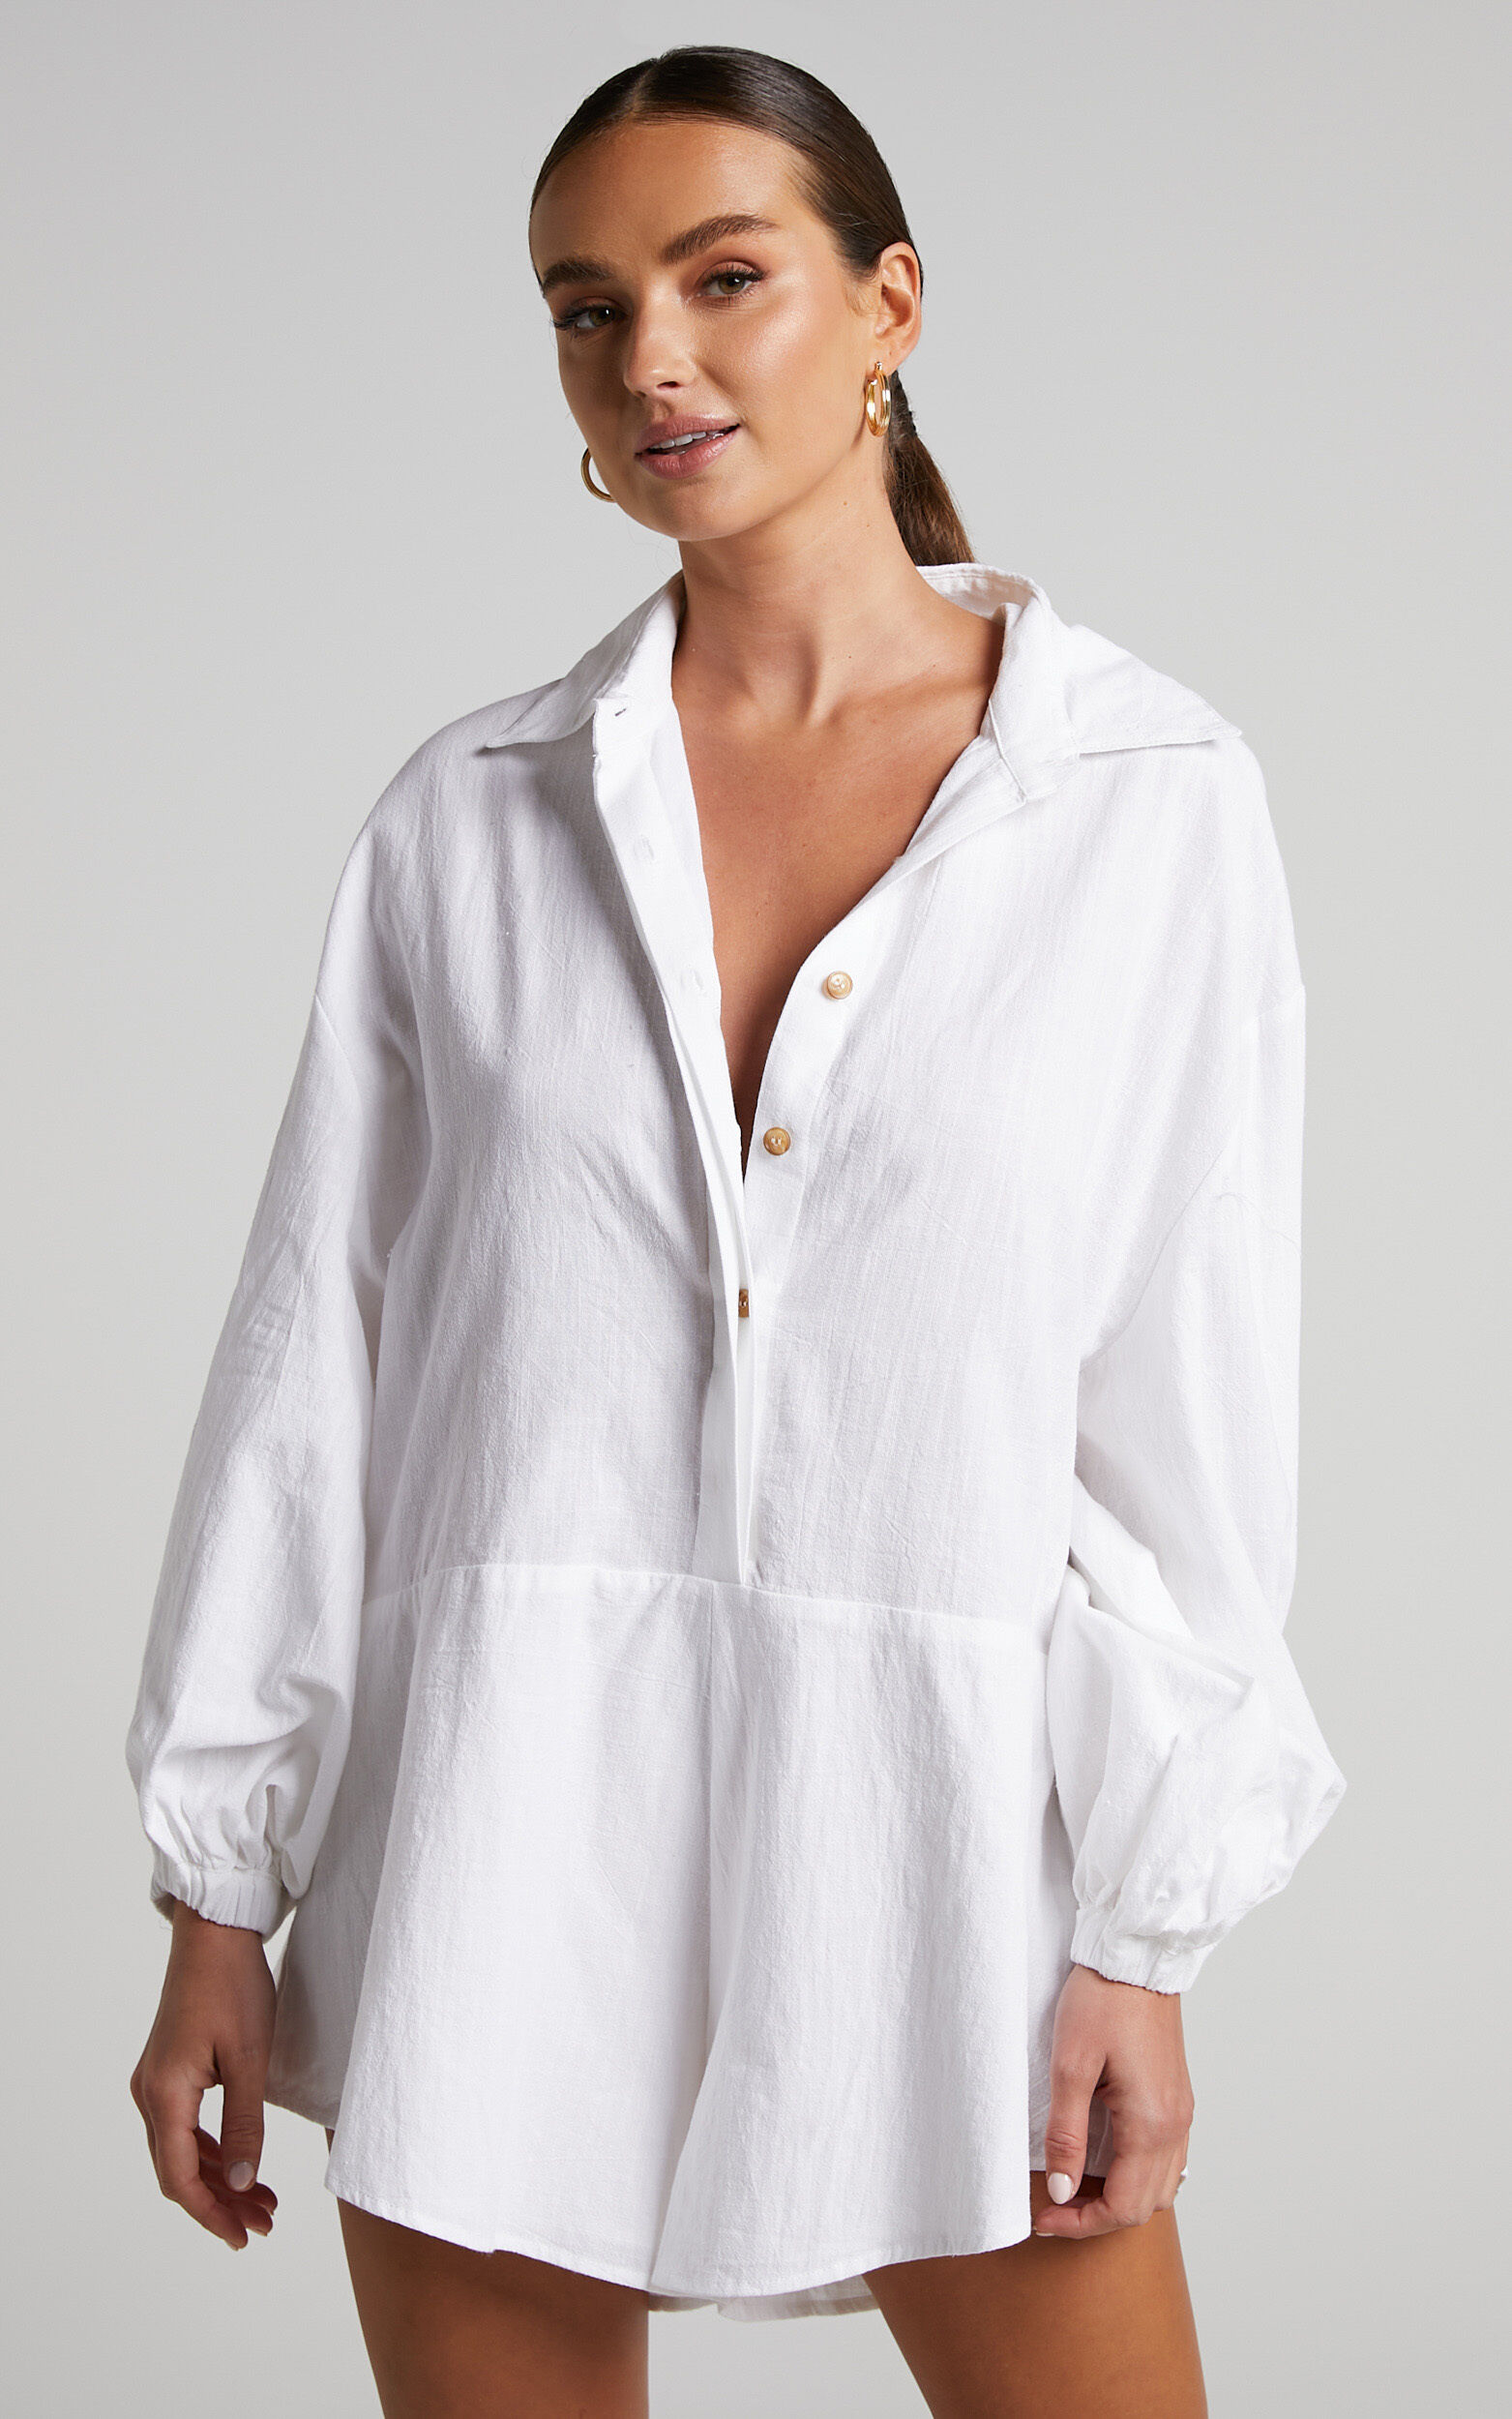 Anka Playsuit - Relaxed Button Front Shirt Playsuit in White - 04, WHT1, super-hi-res image number null